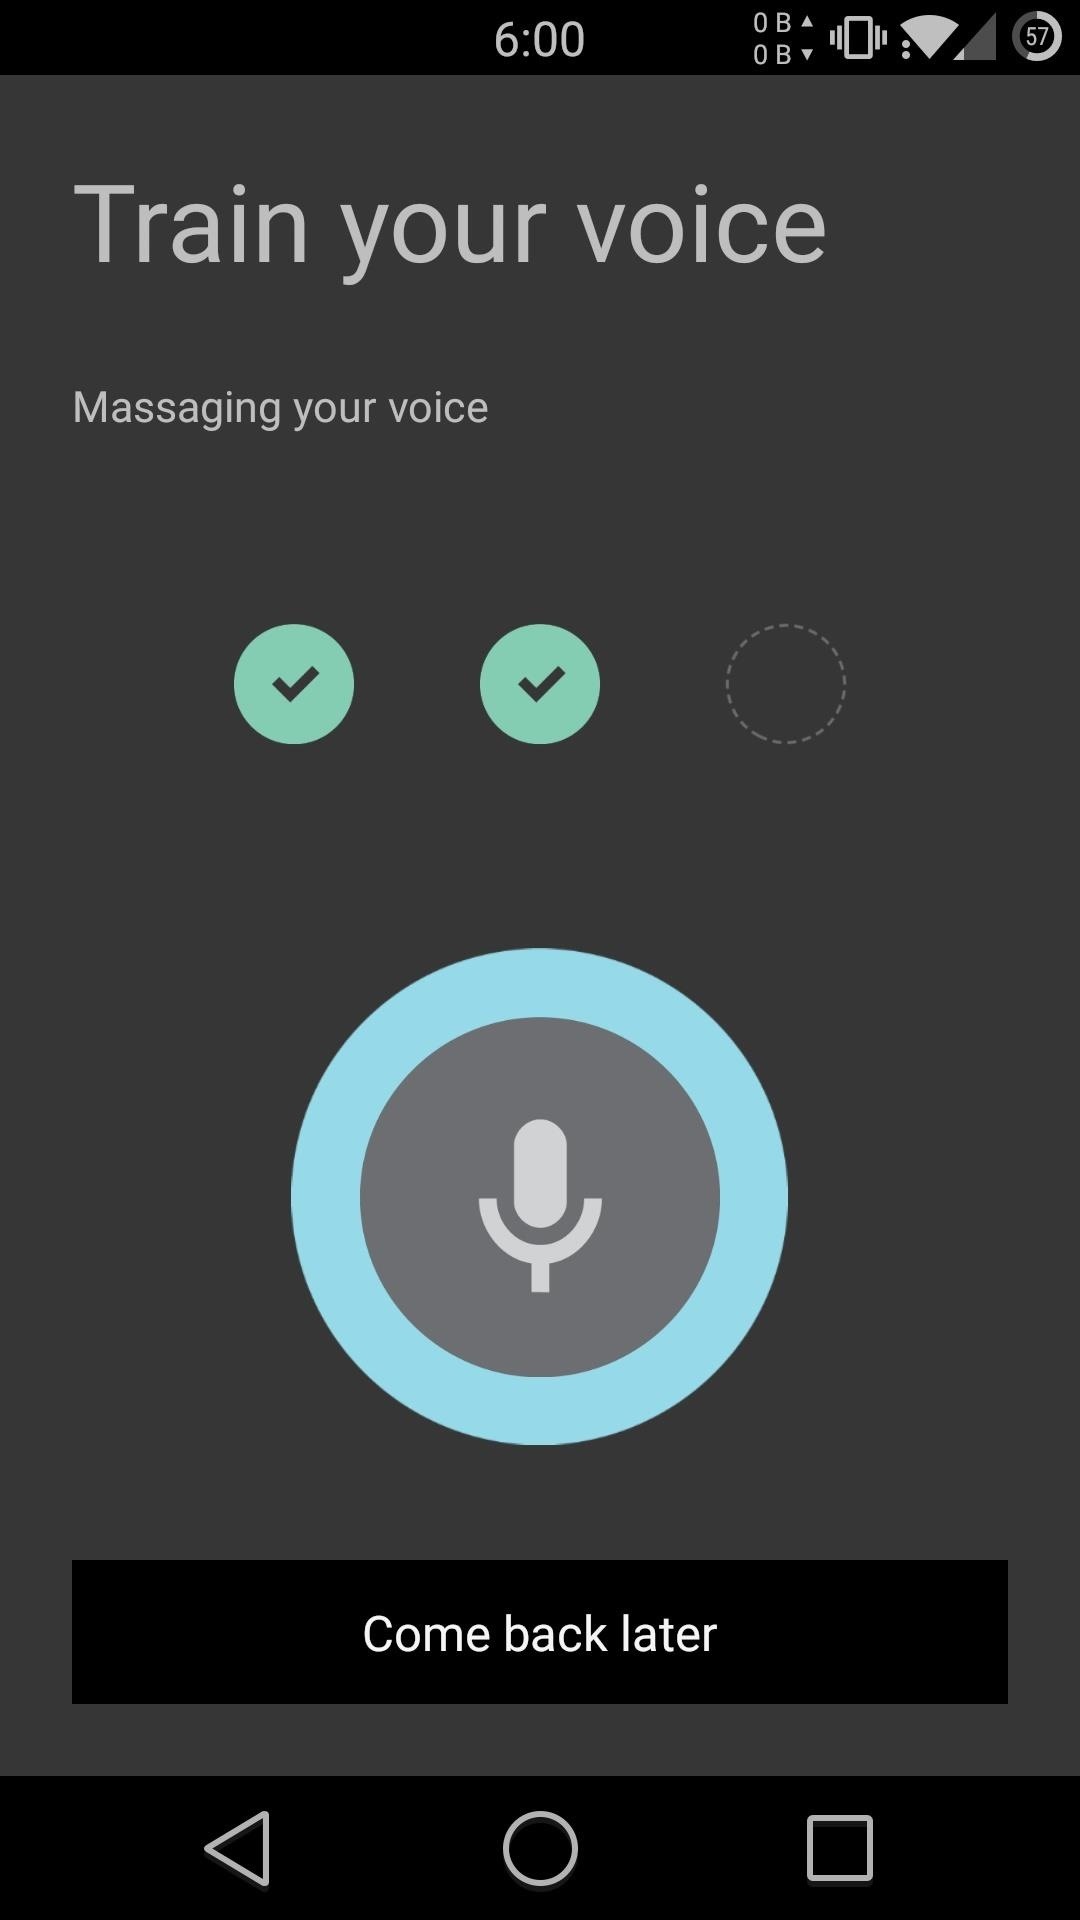 Add “Hey, Snapdragon” Voice Detection to Your OnePlus One